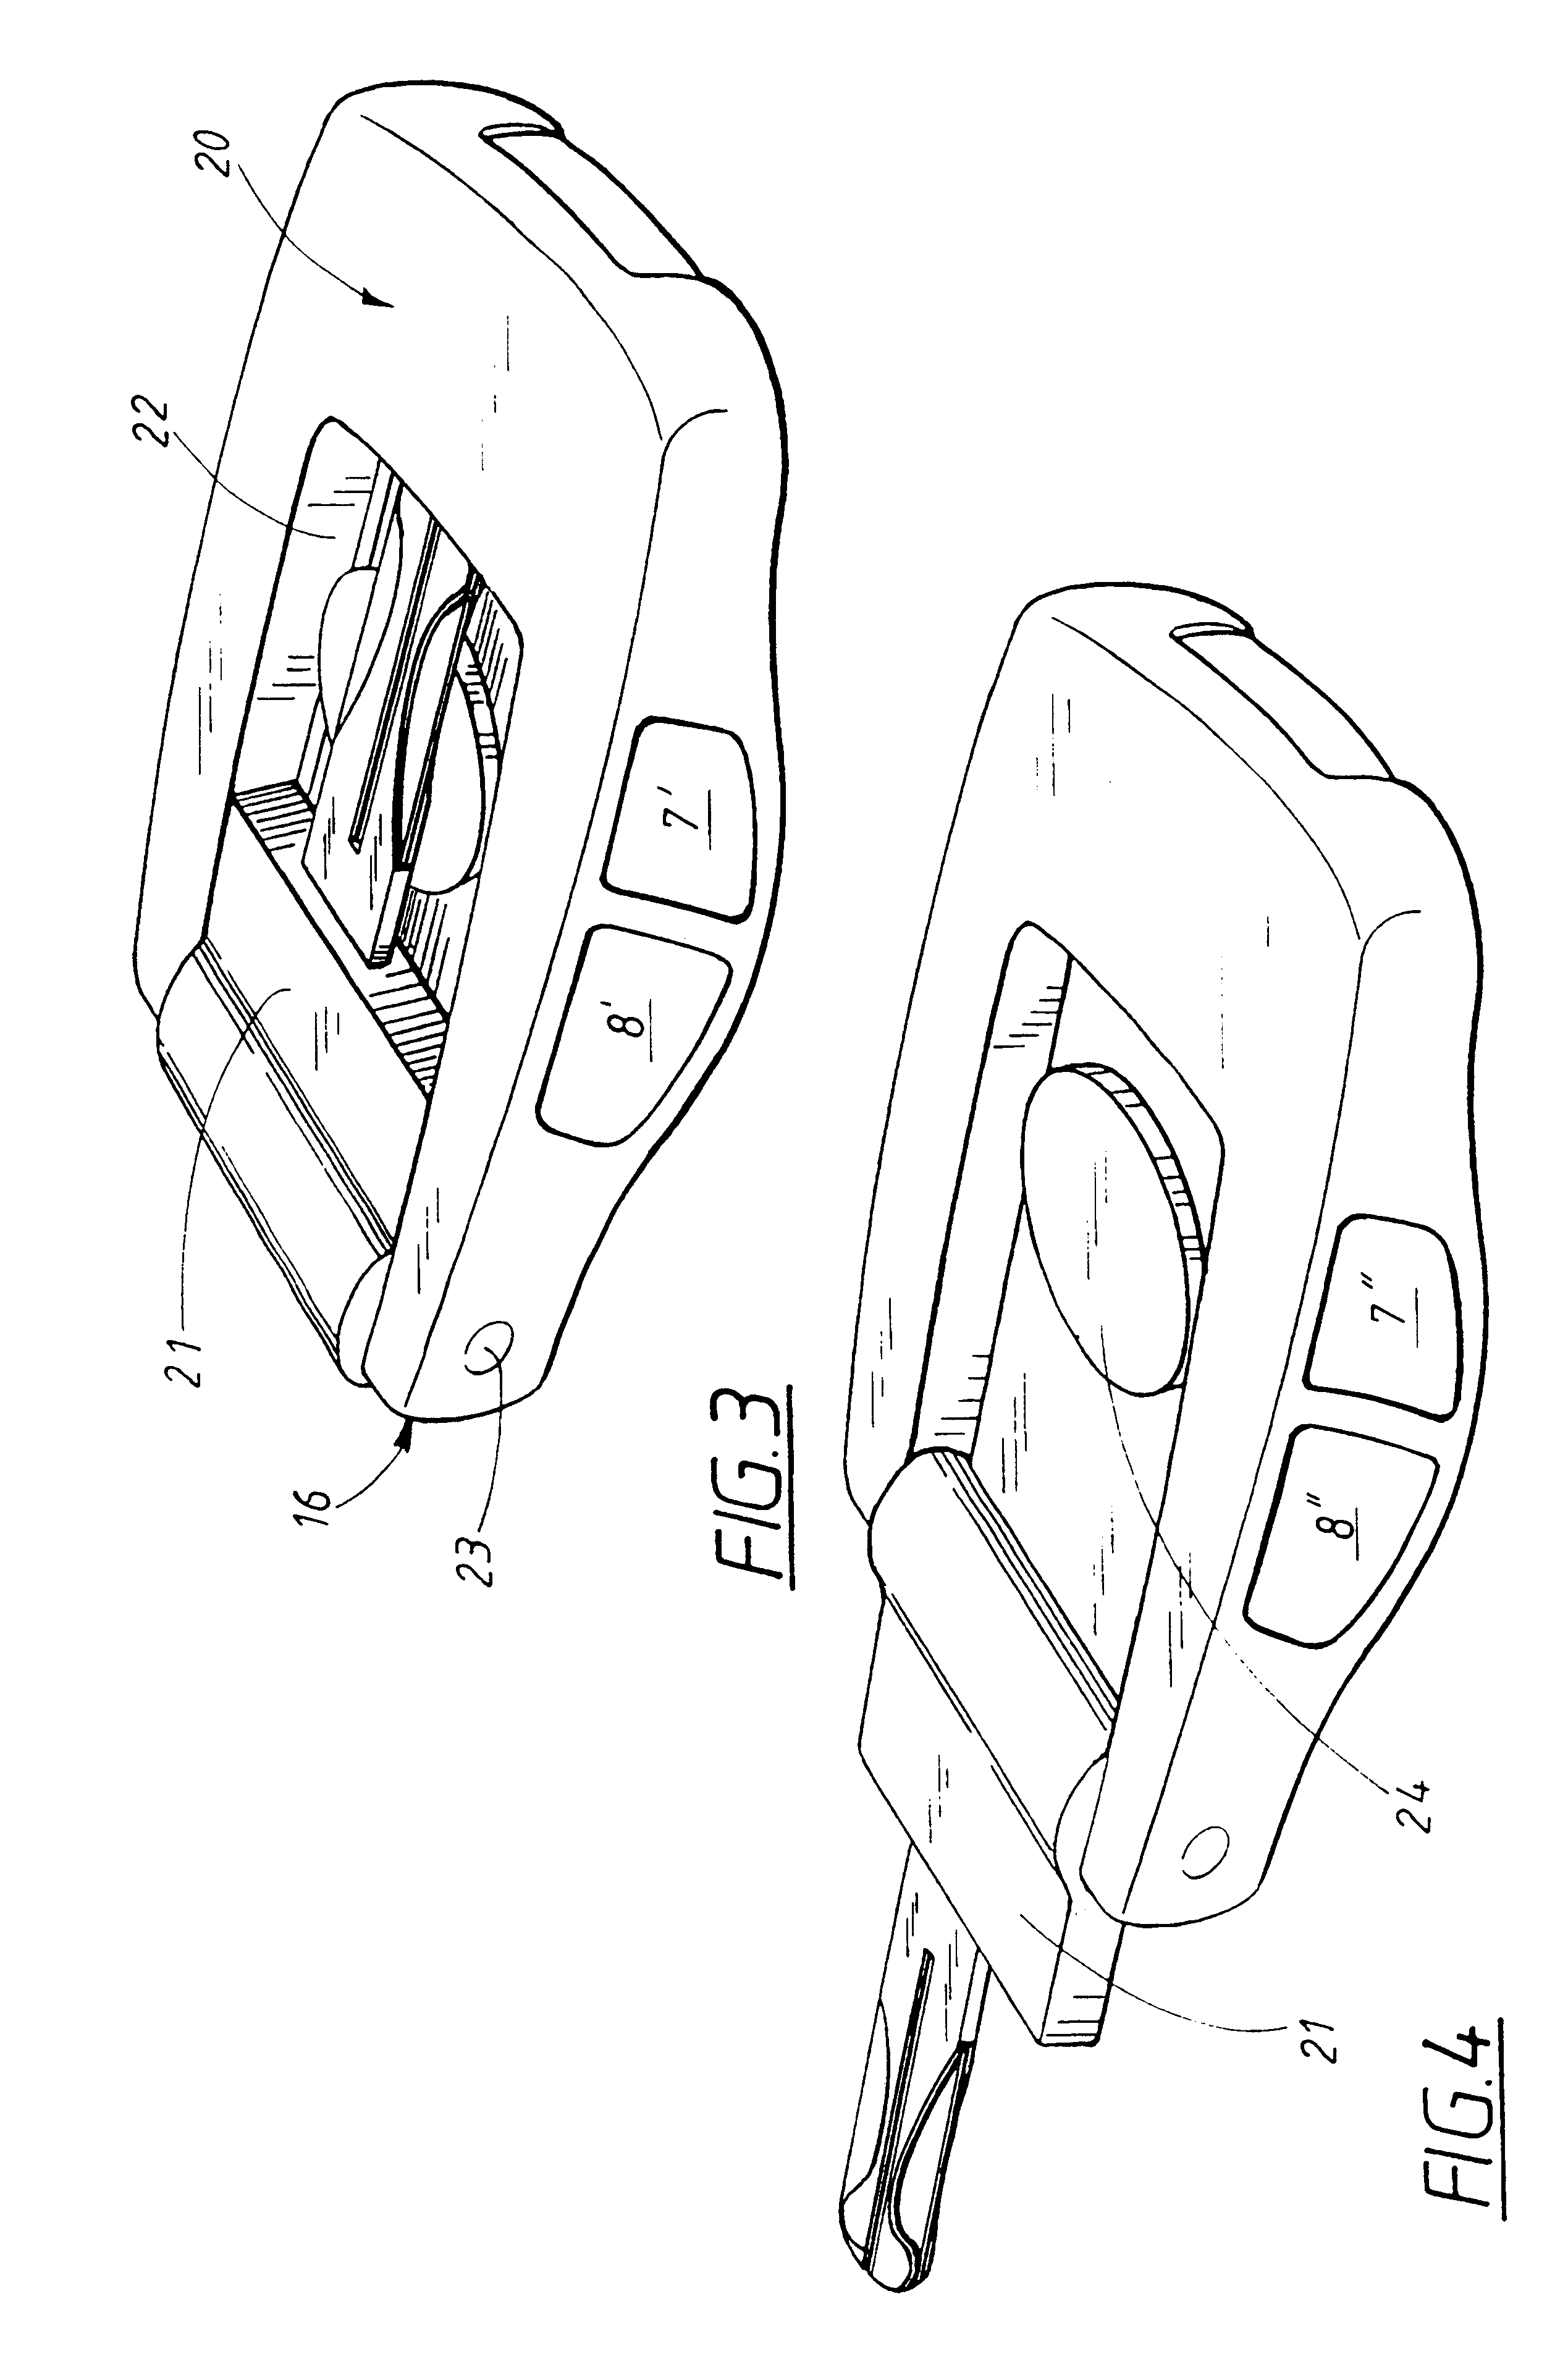 Remote control device for remote operation of a motor vehicle